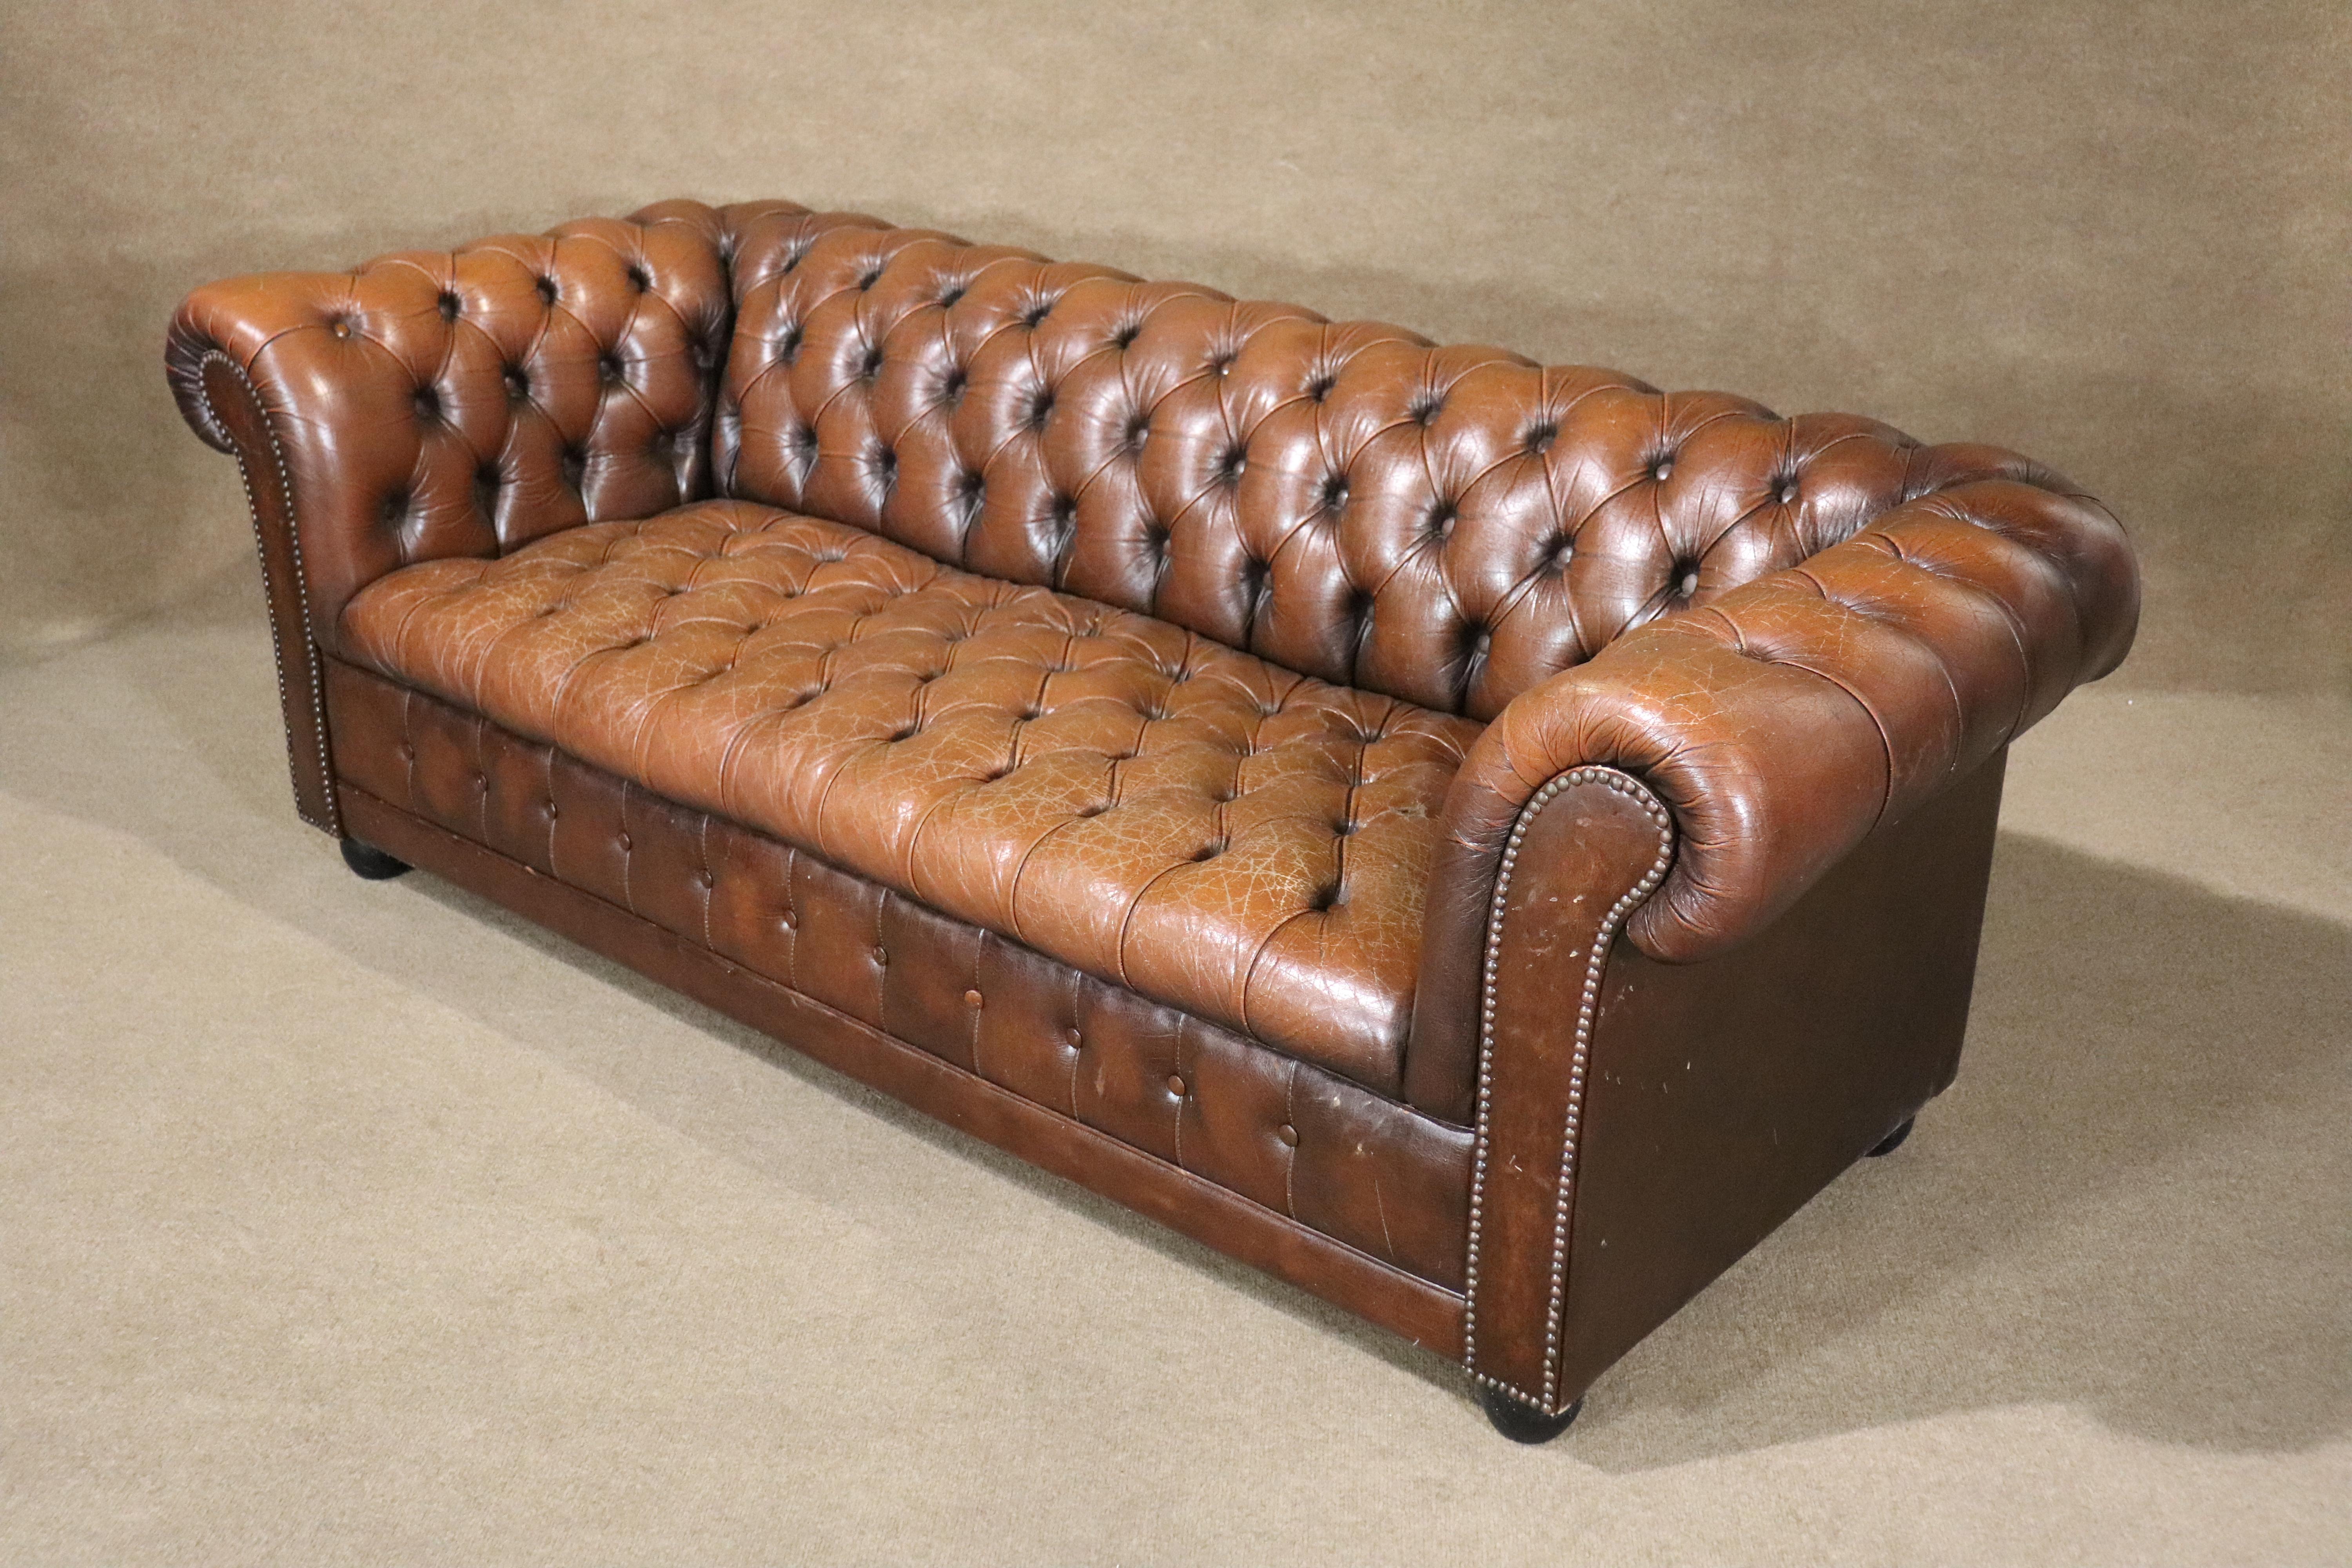 Six foot long tufted chesterfield sofa. Great age and wear to the leather.
Please confirm location NY or NJ